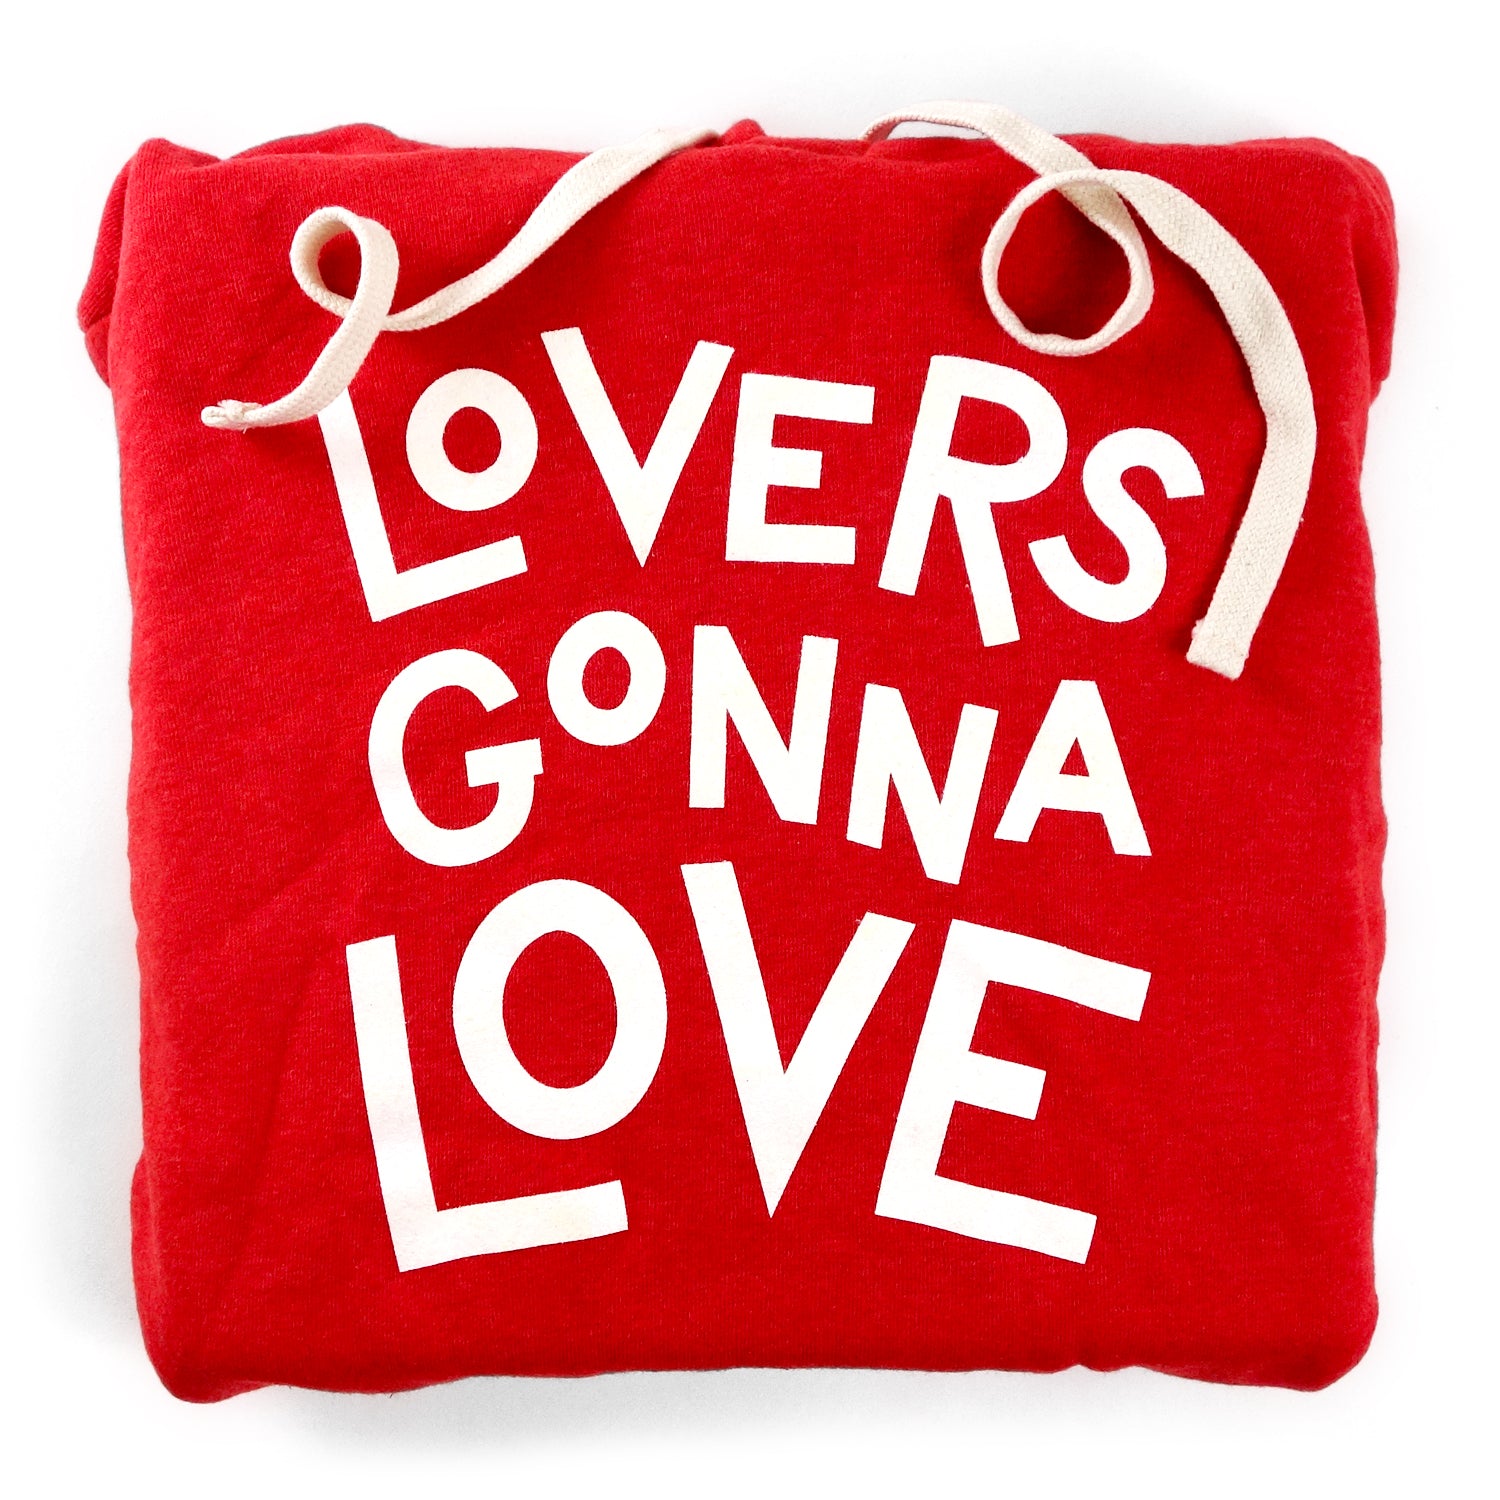 A photo of a red hoodie that says "Lovers Gonna Love"